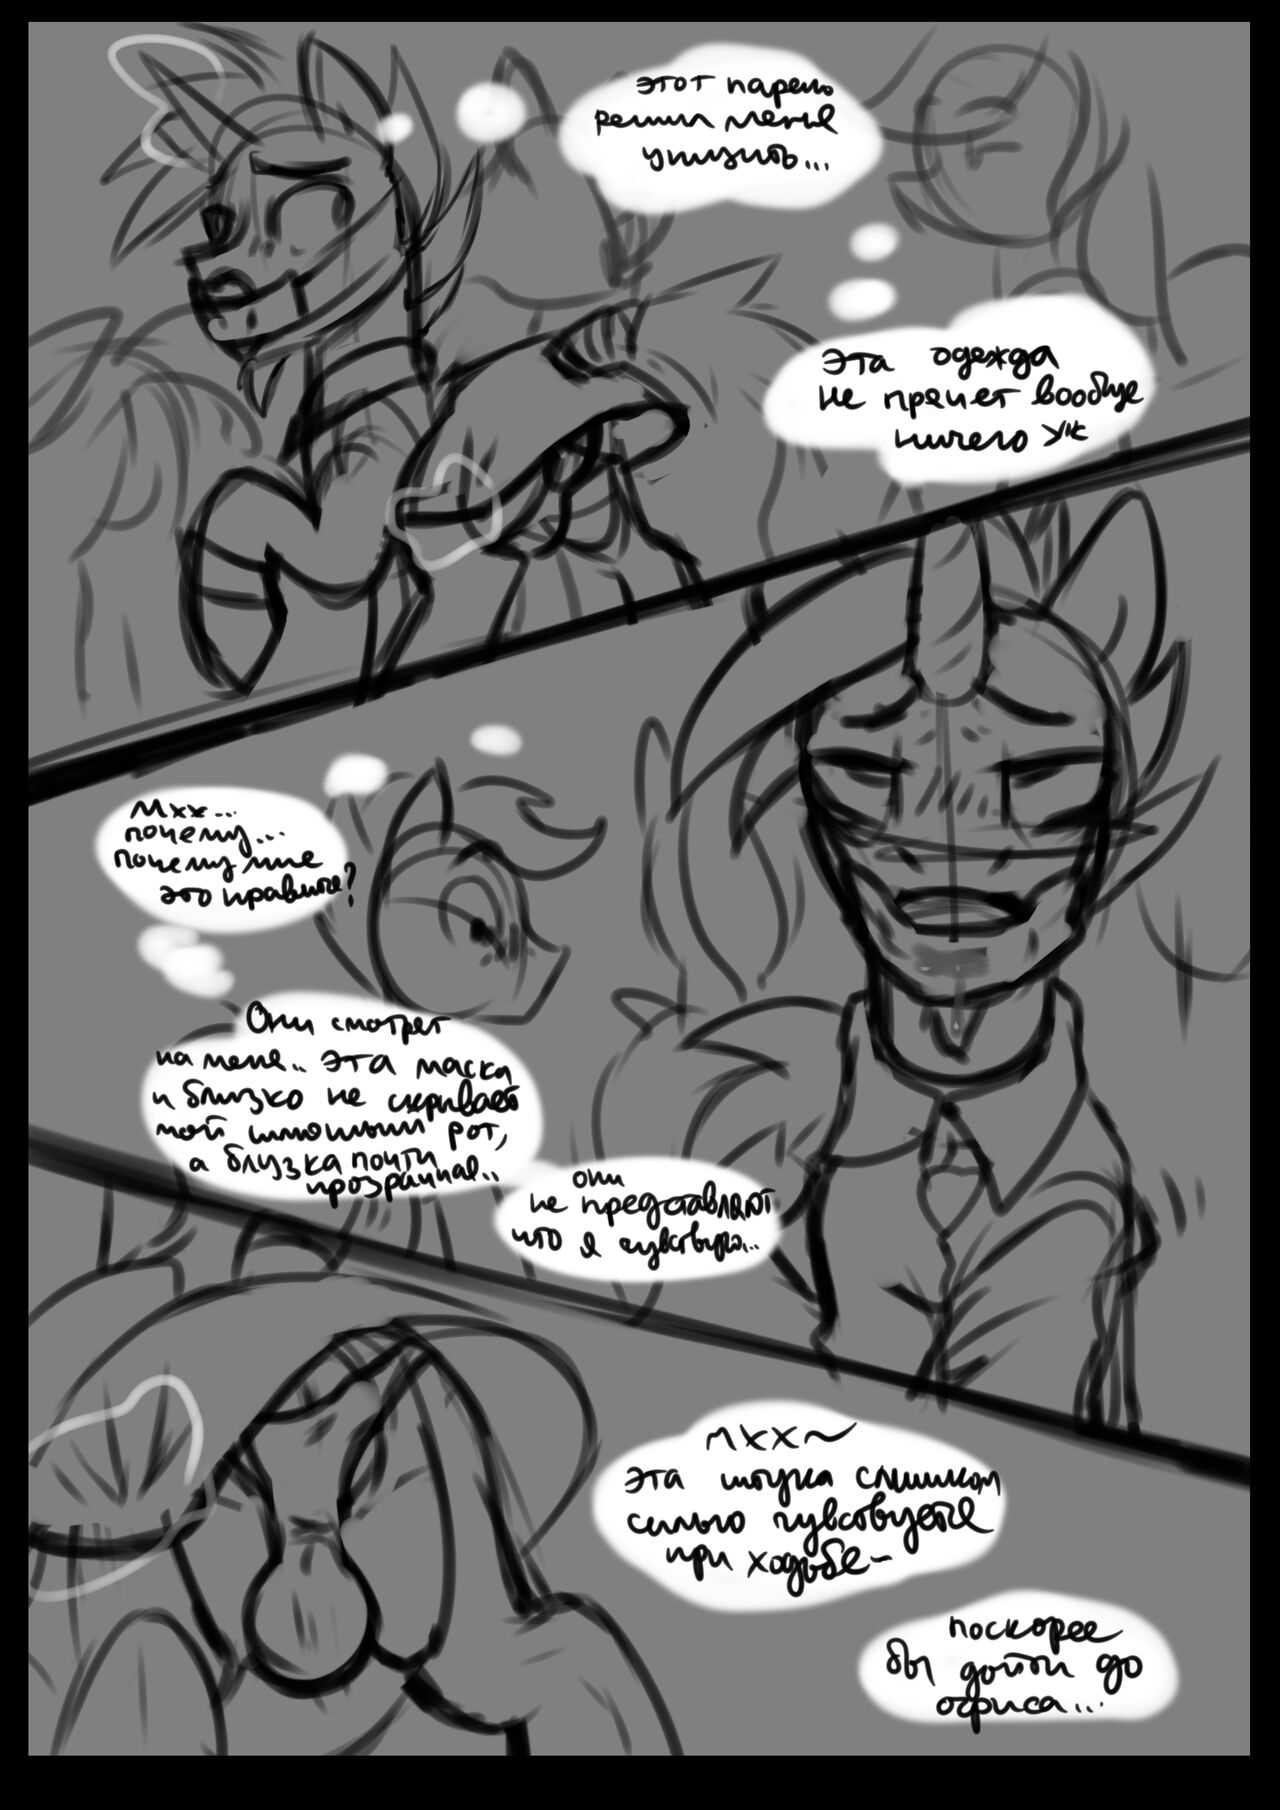 [JedaySkayVoker] Play the Record, ch. 1-3 (My Little Pony: Friendship is Magic) [+Sketches][Ongoing][Russian] 32